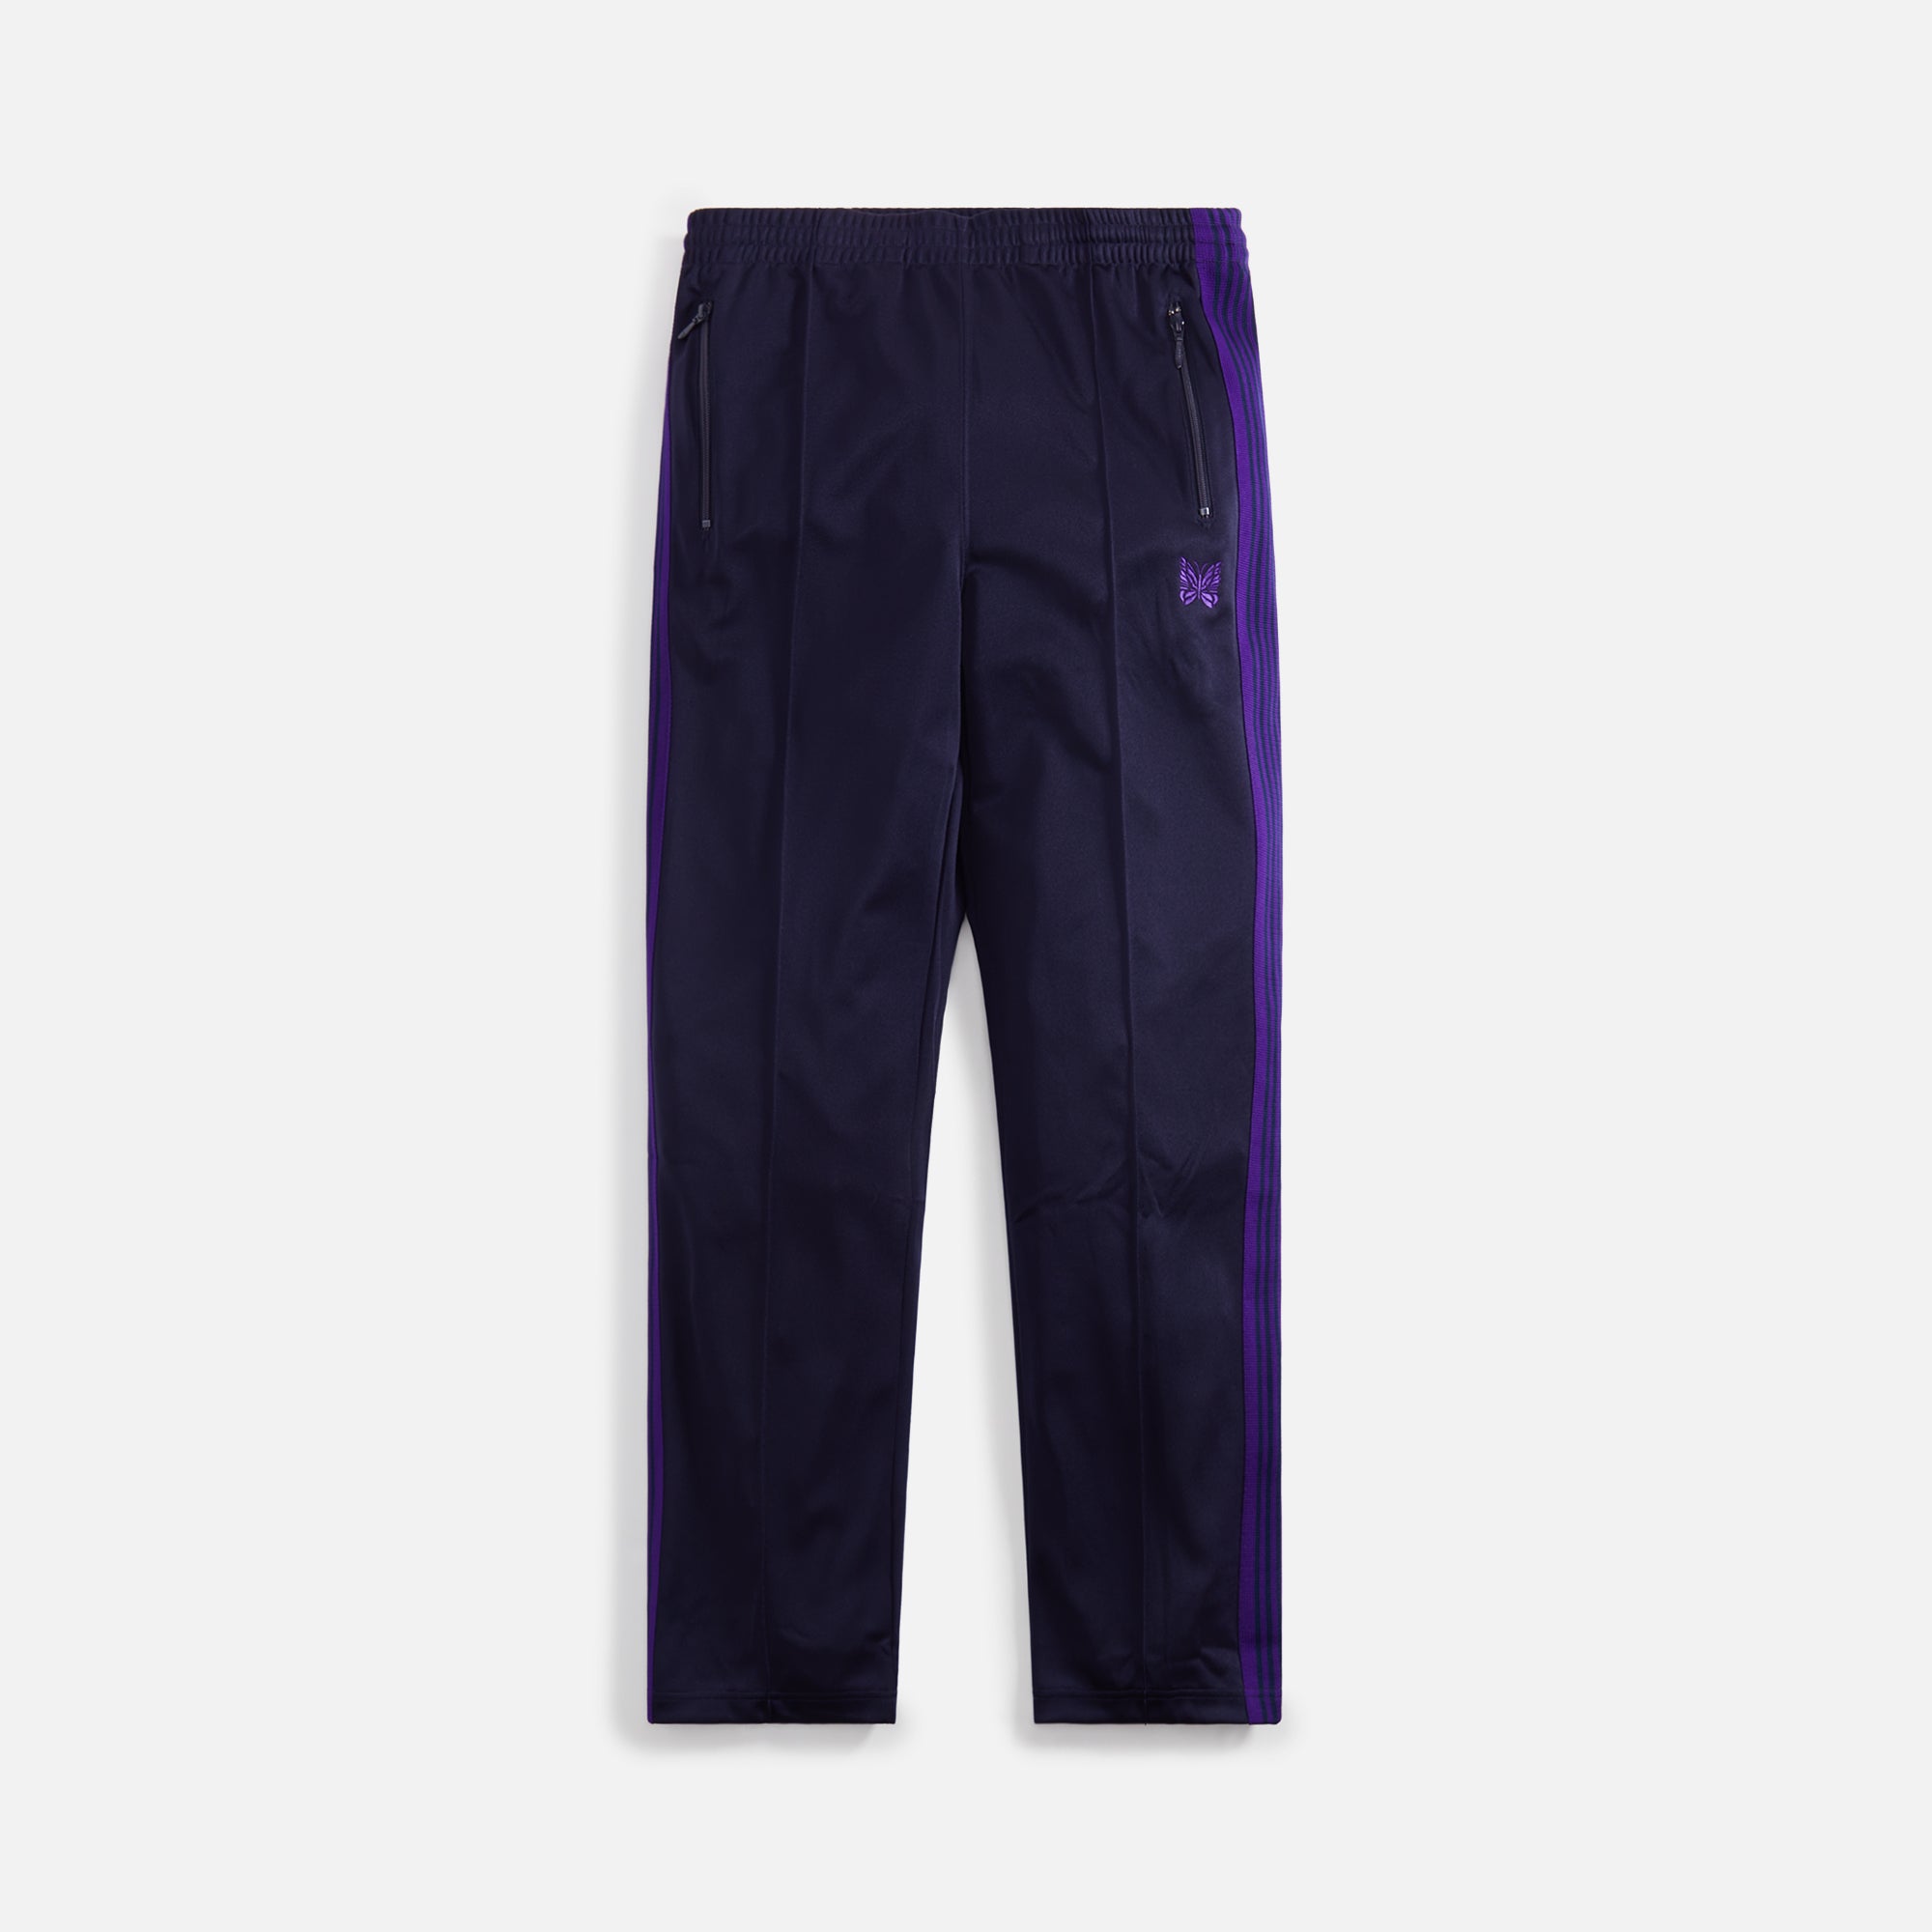 Needles Track Pant - Poly Smooth Navy